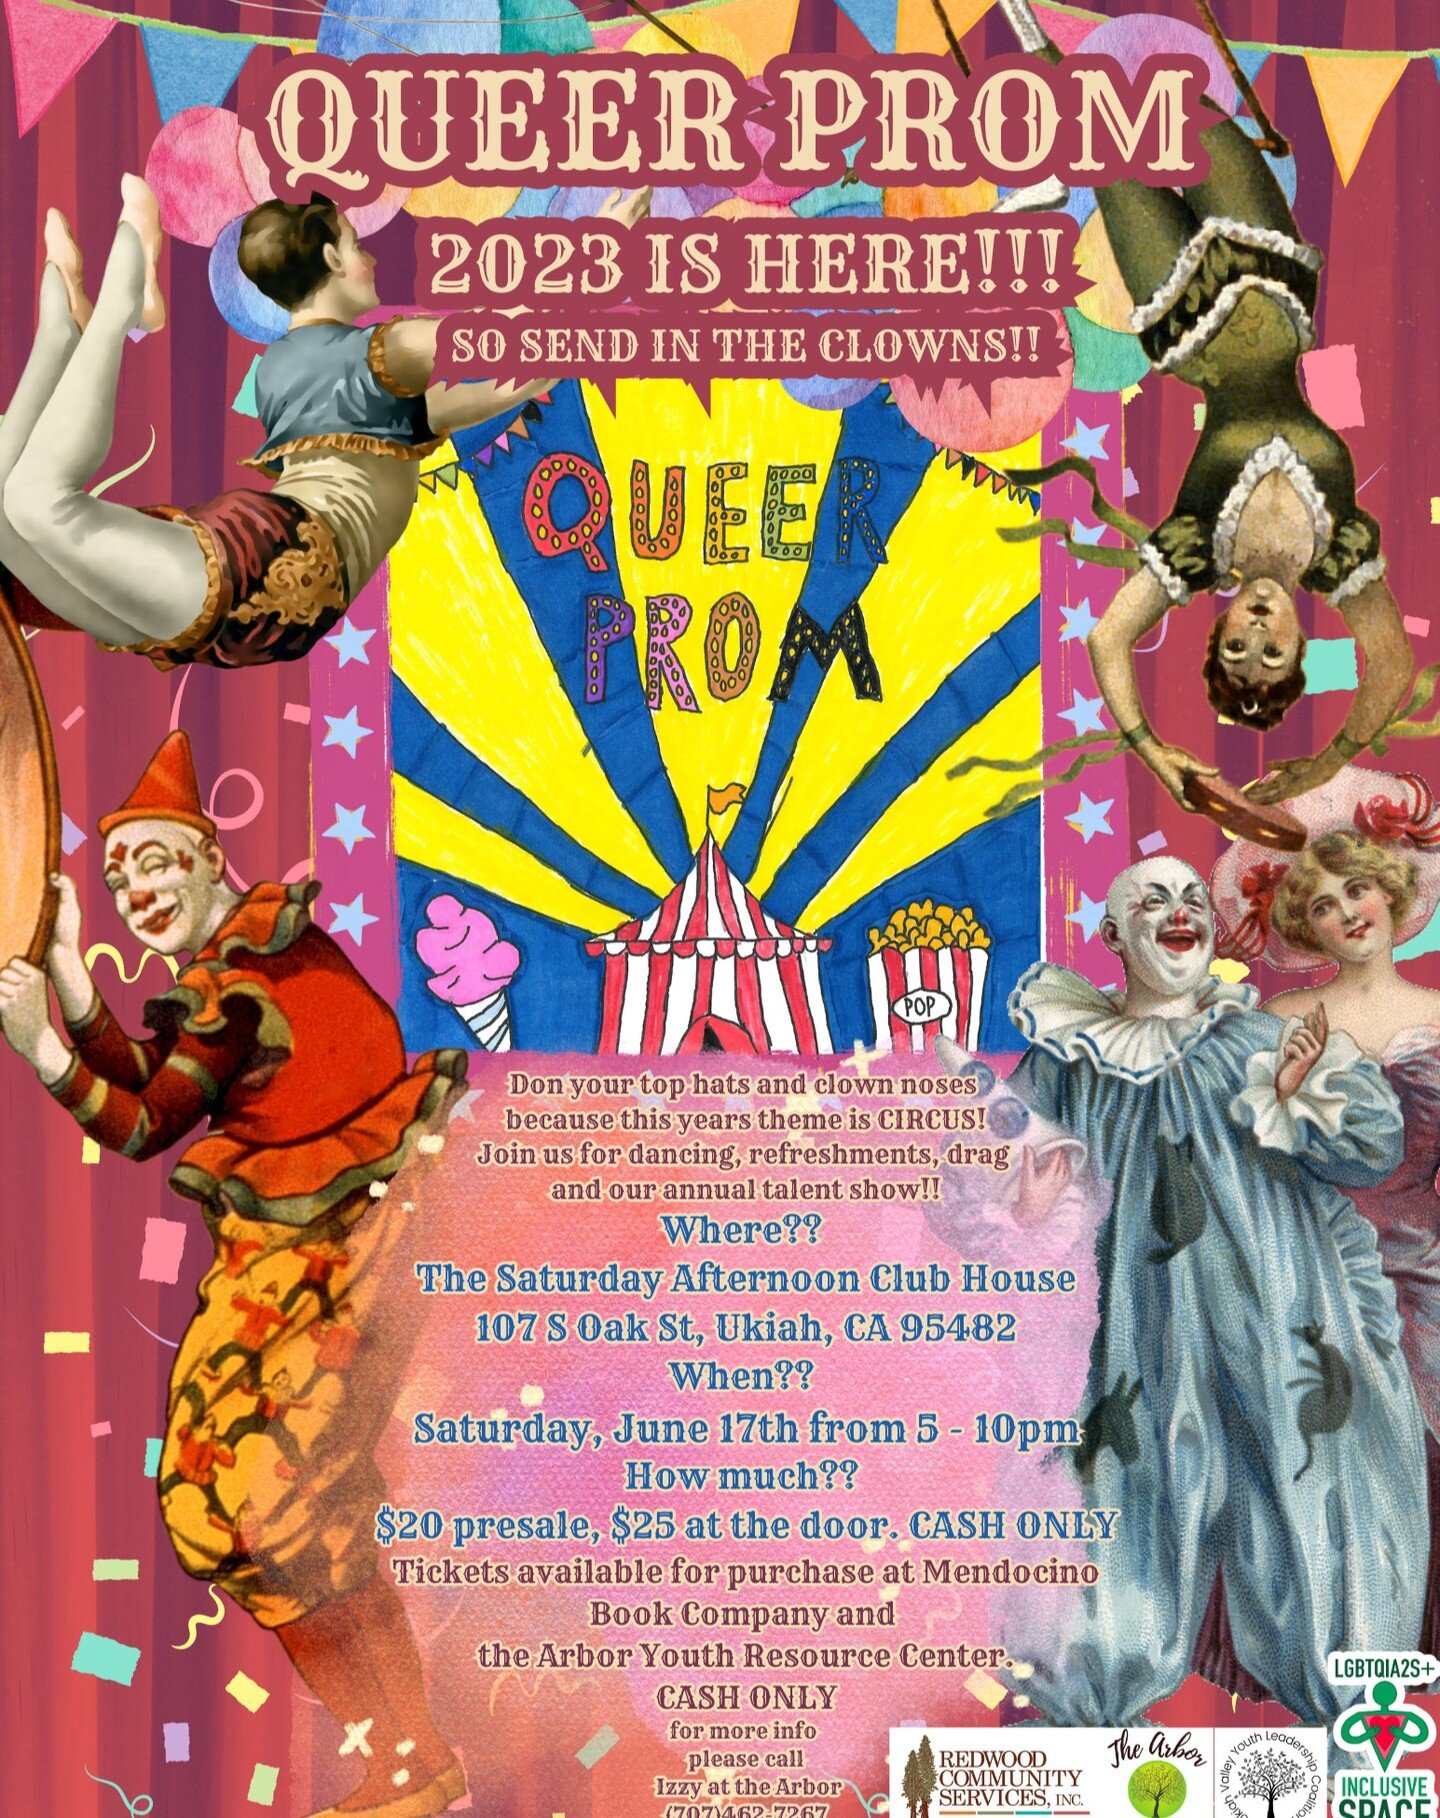 ITS GO TIME!!! 
GO GET YOUR PRESALE TICKETS NOW!!!

QUEER PROM 2023 
SEND IN THE CLOWNS!! 
where? 
Saturday Afternoon Club 107 South Oak Street, Ukiah
When? 
June 17th from 5 - 10pm 
How Much?? 
Presale: $20.00 tickets available at the Arbor and Mend